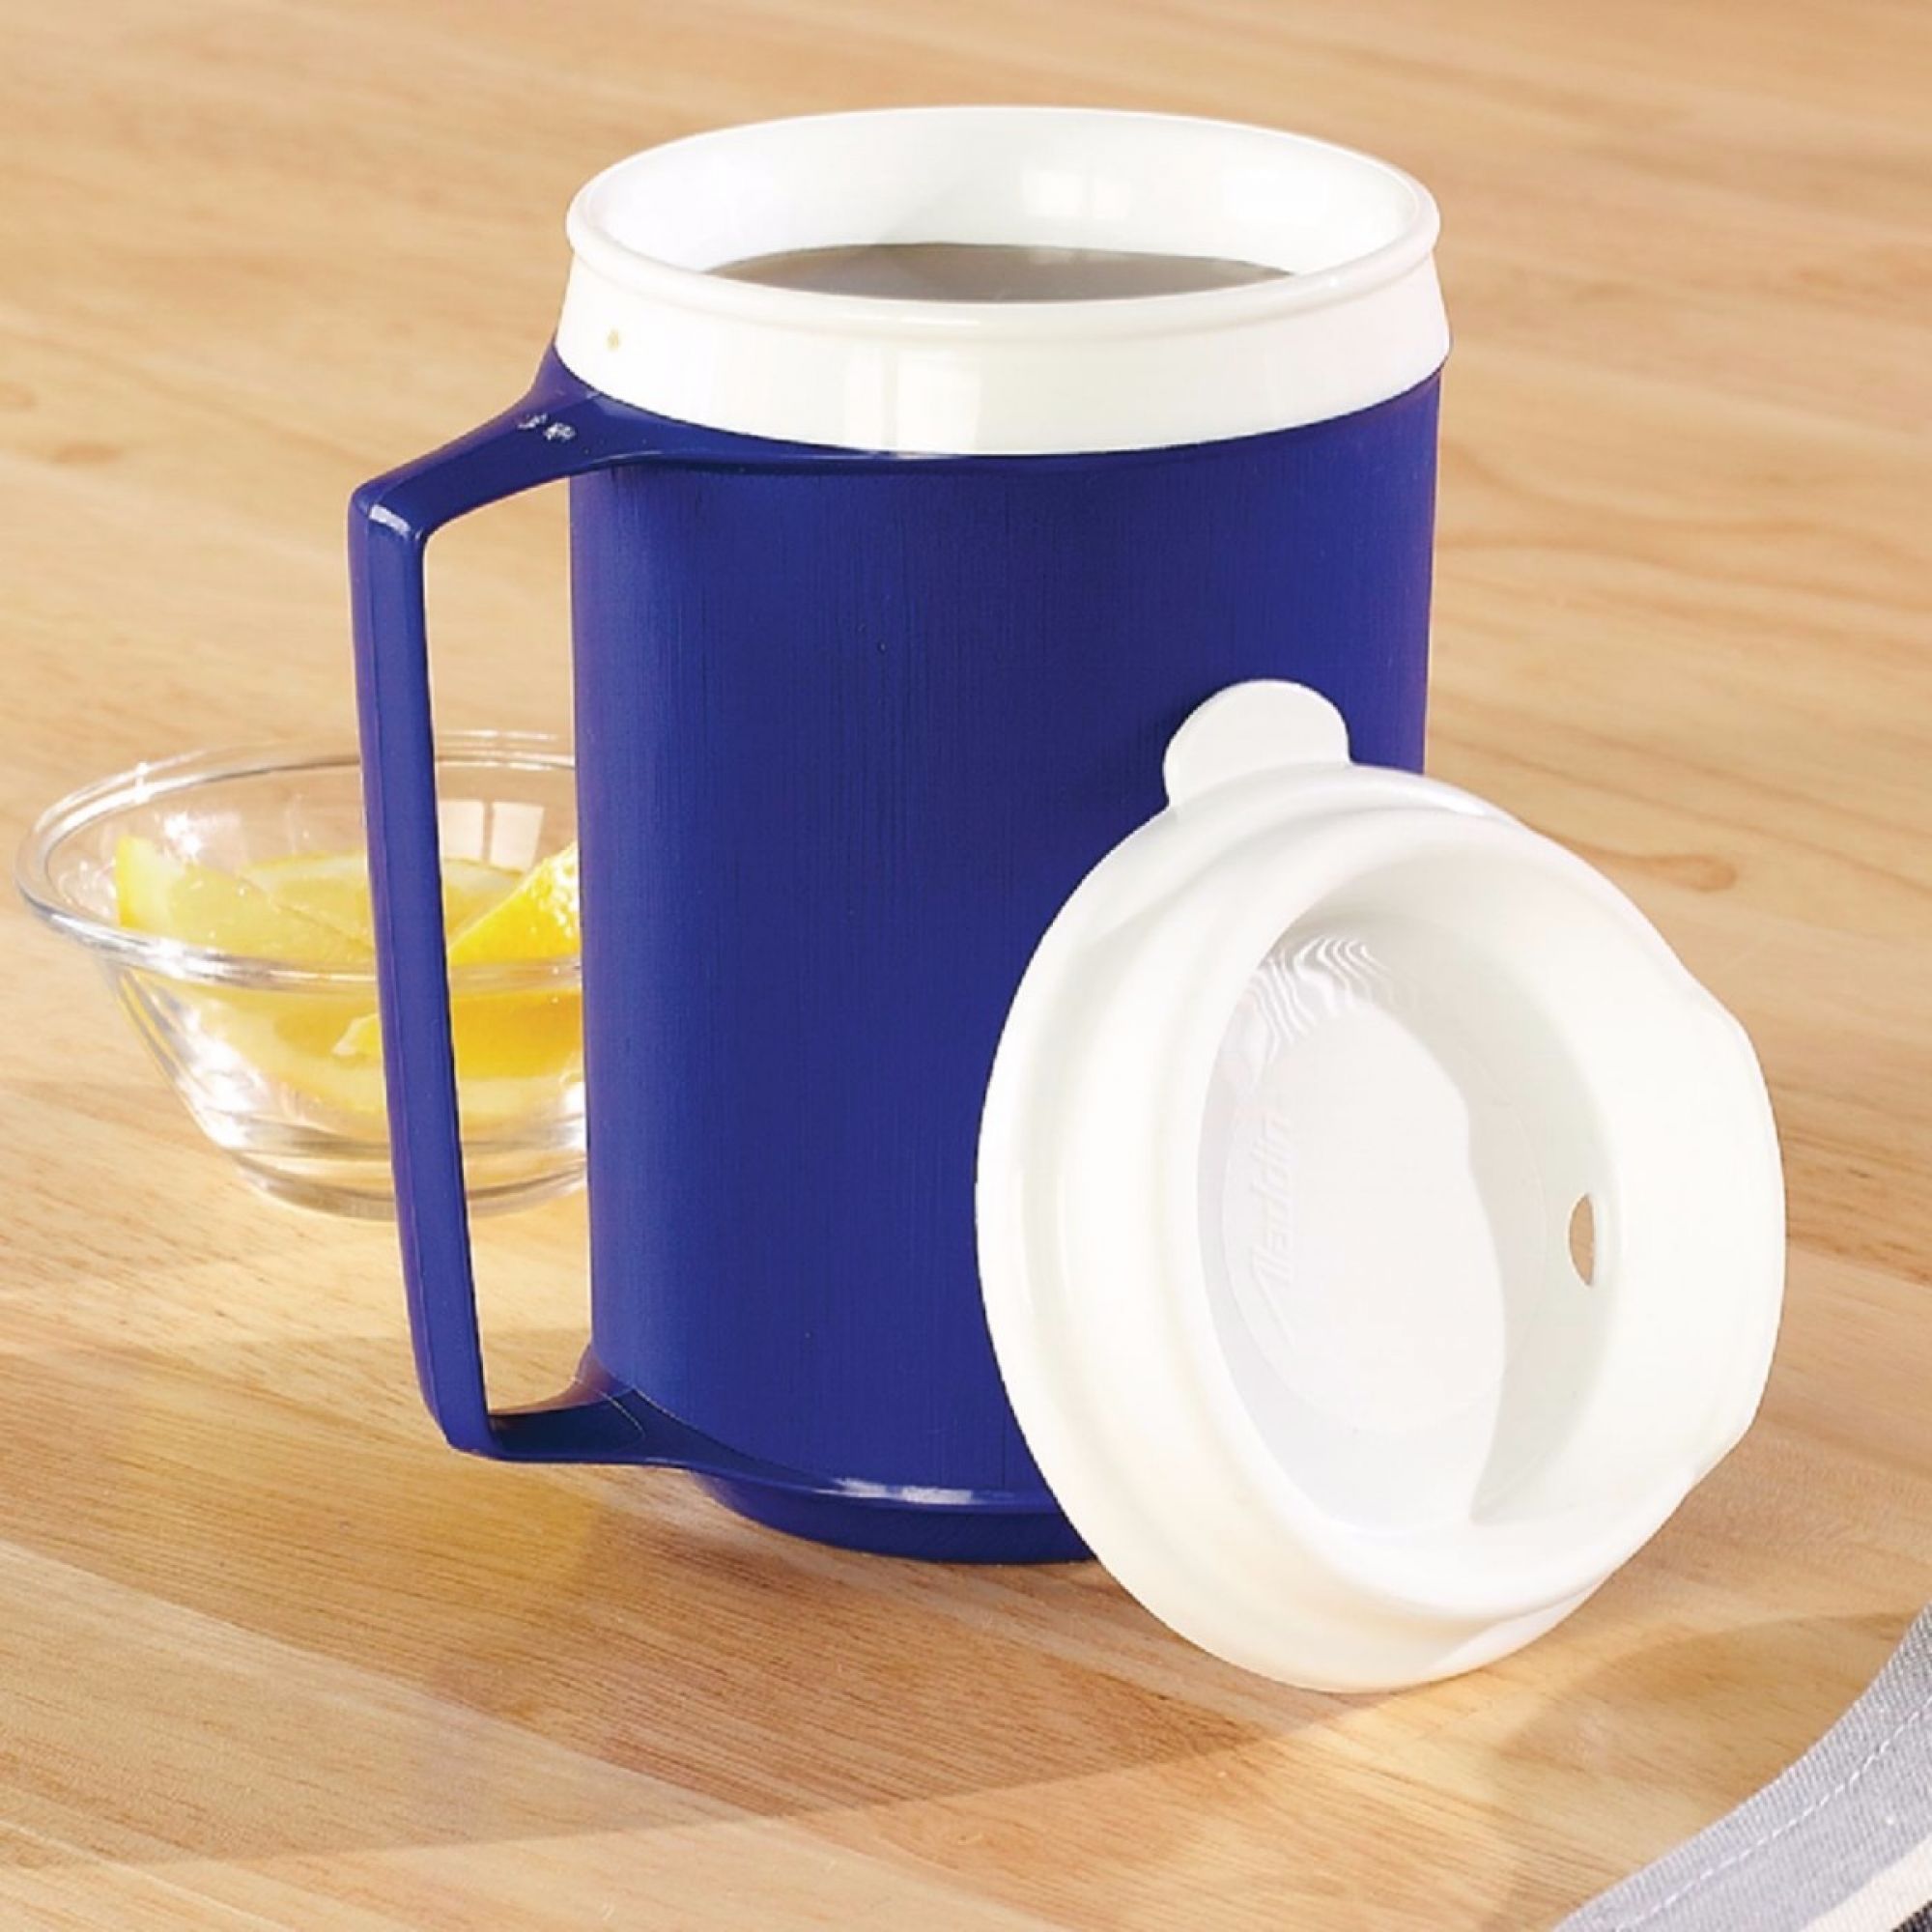 Weighted Insulated Mug :: large, heavy cup with single handle for Parkinsons